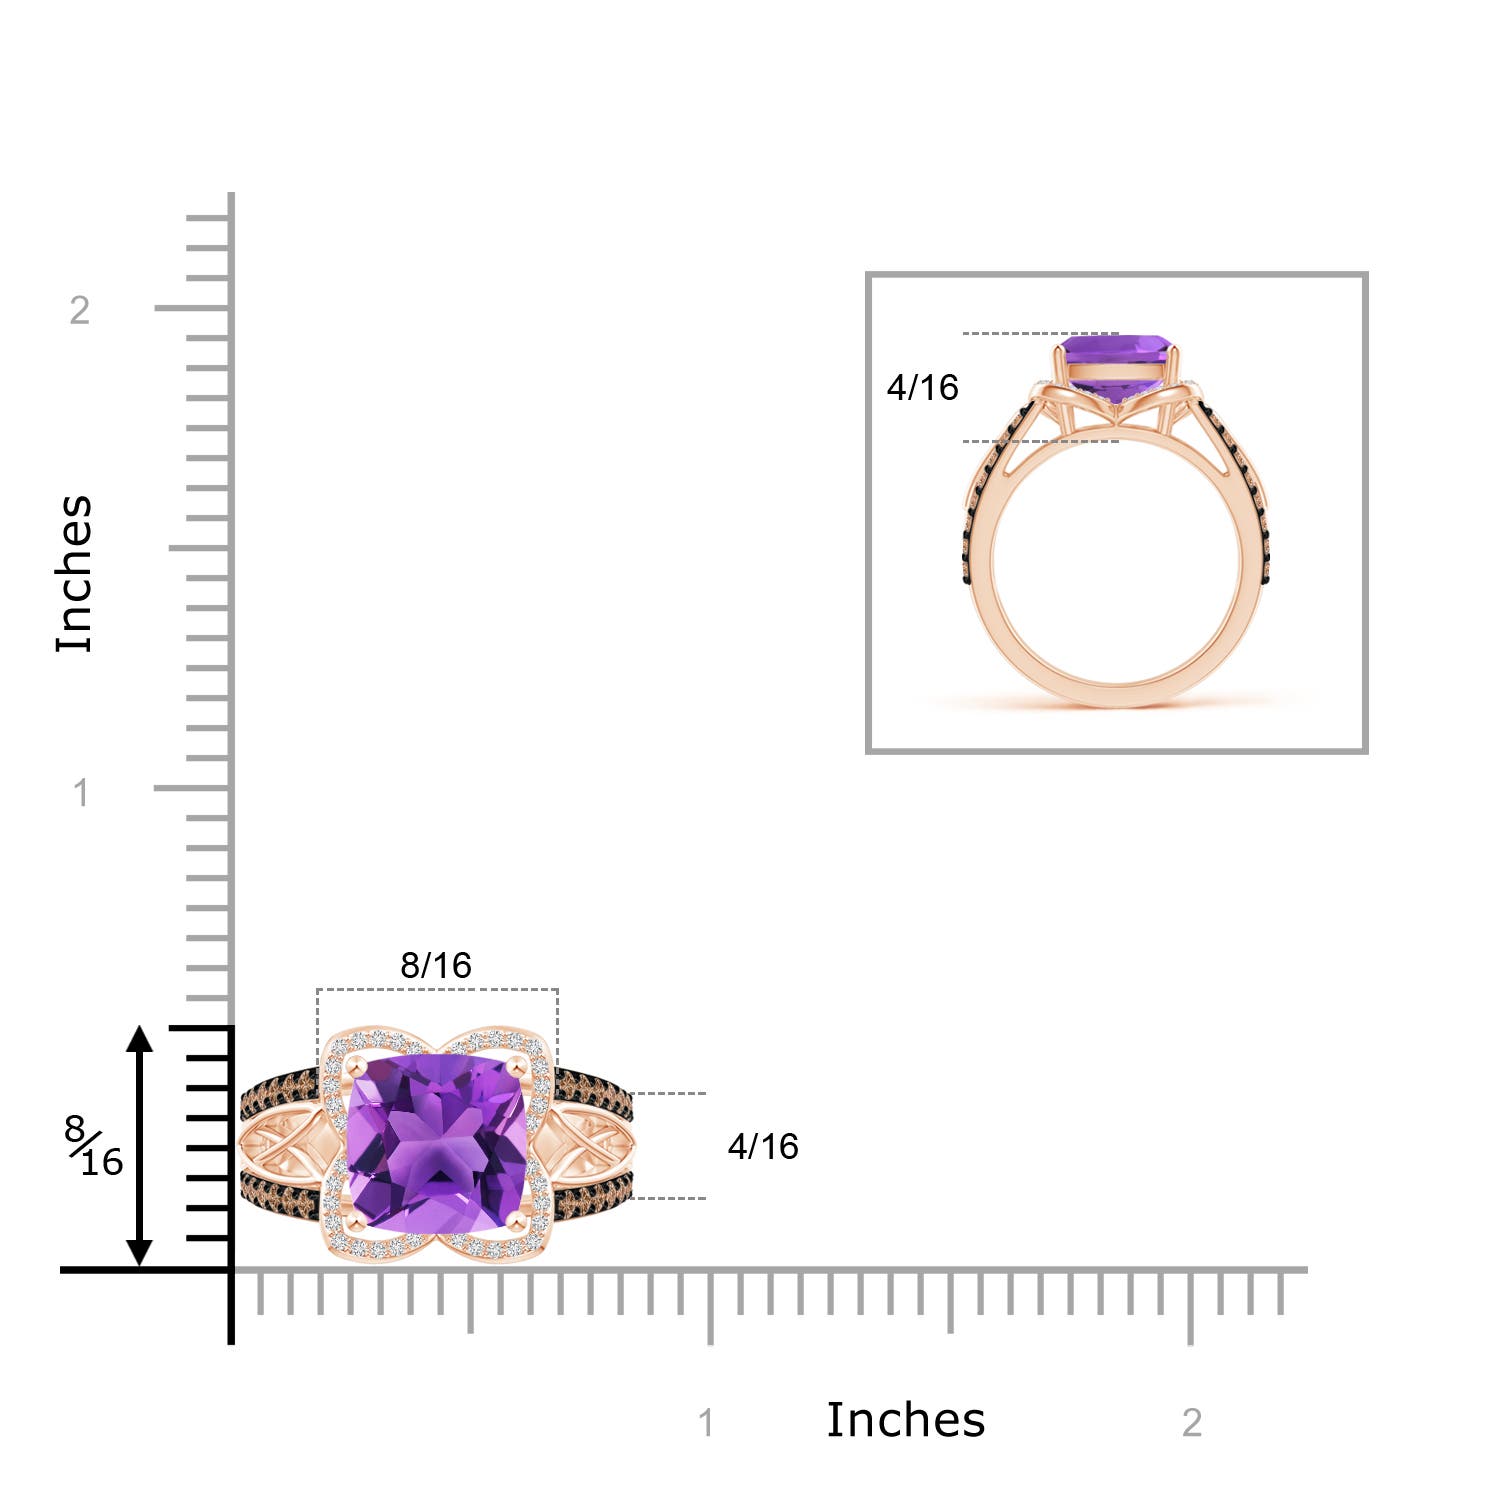 AAA - Amethyst / 3.61 CT / 14 KT Rose Gold